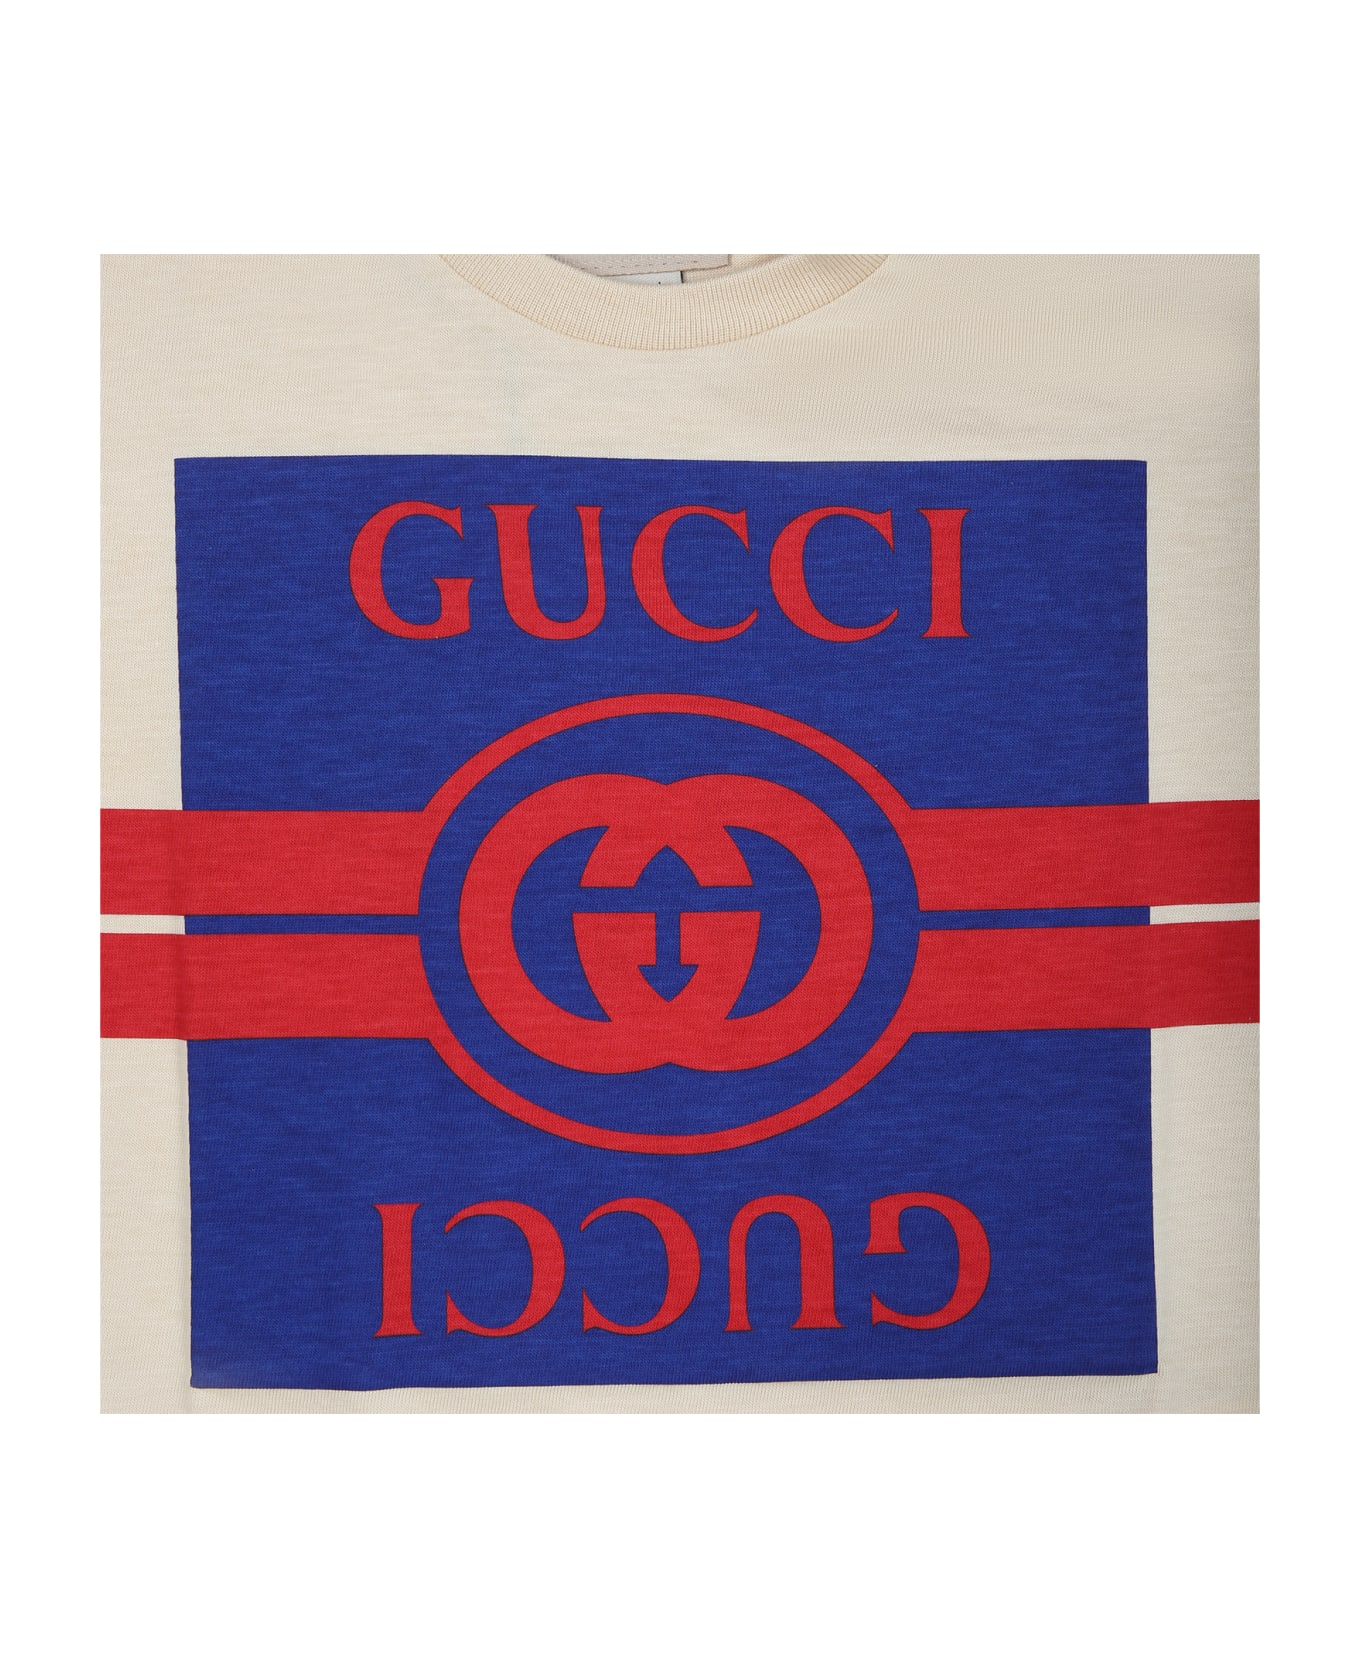 Gucci Ivory T-shirt For Baby Girl With Double G - Ivory Tシャツ＆ポロシャツ